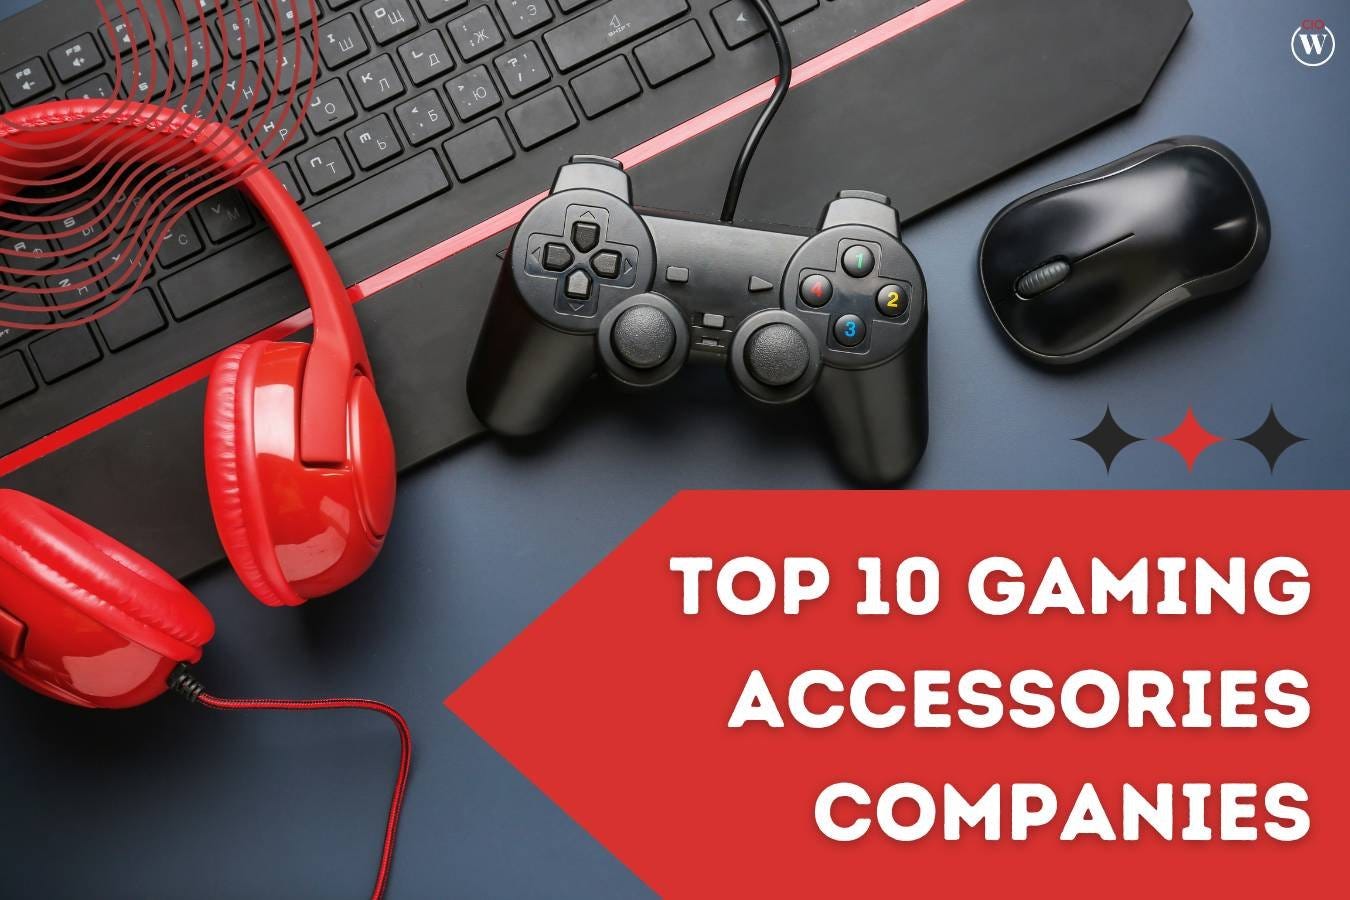 PC Gaming Controllers & Joysticks in PC Gaming Peripherals & Accessories 